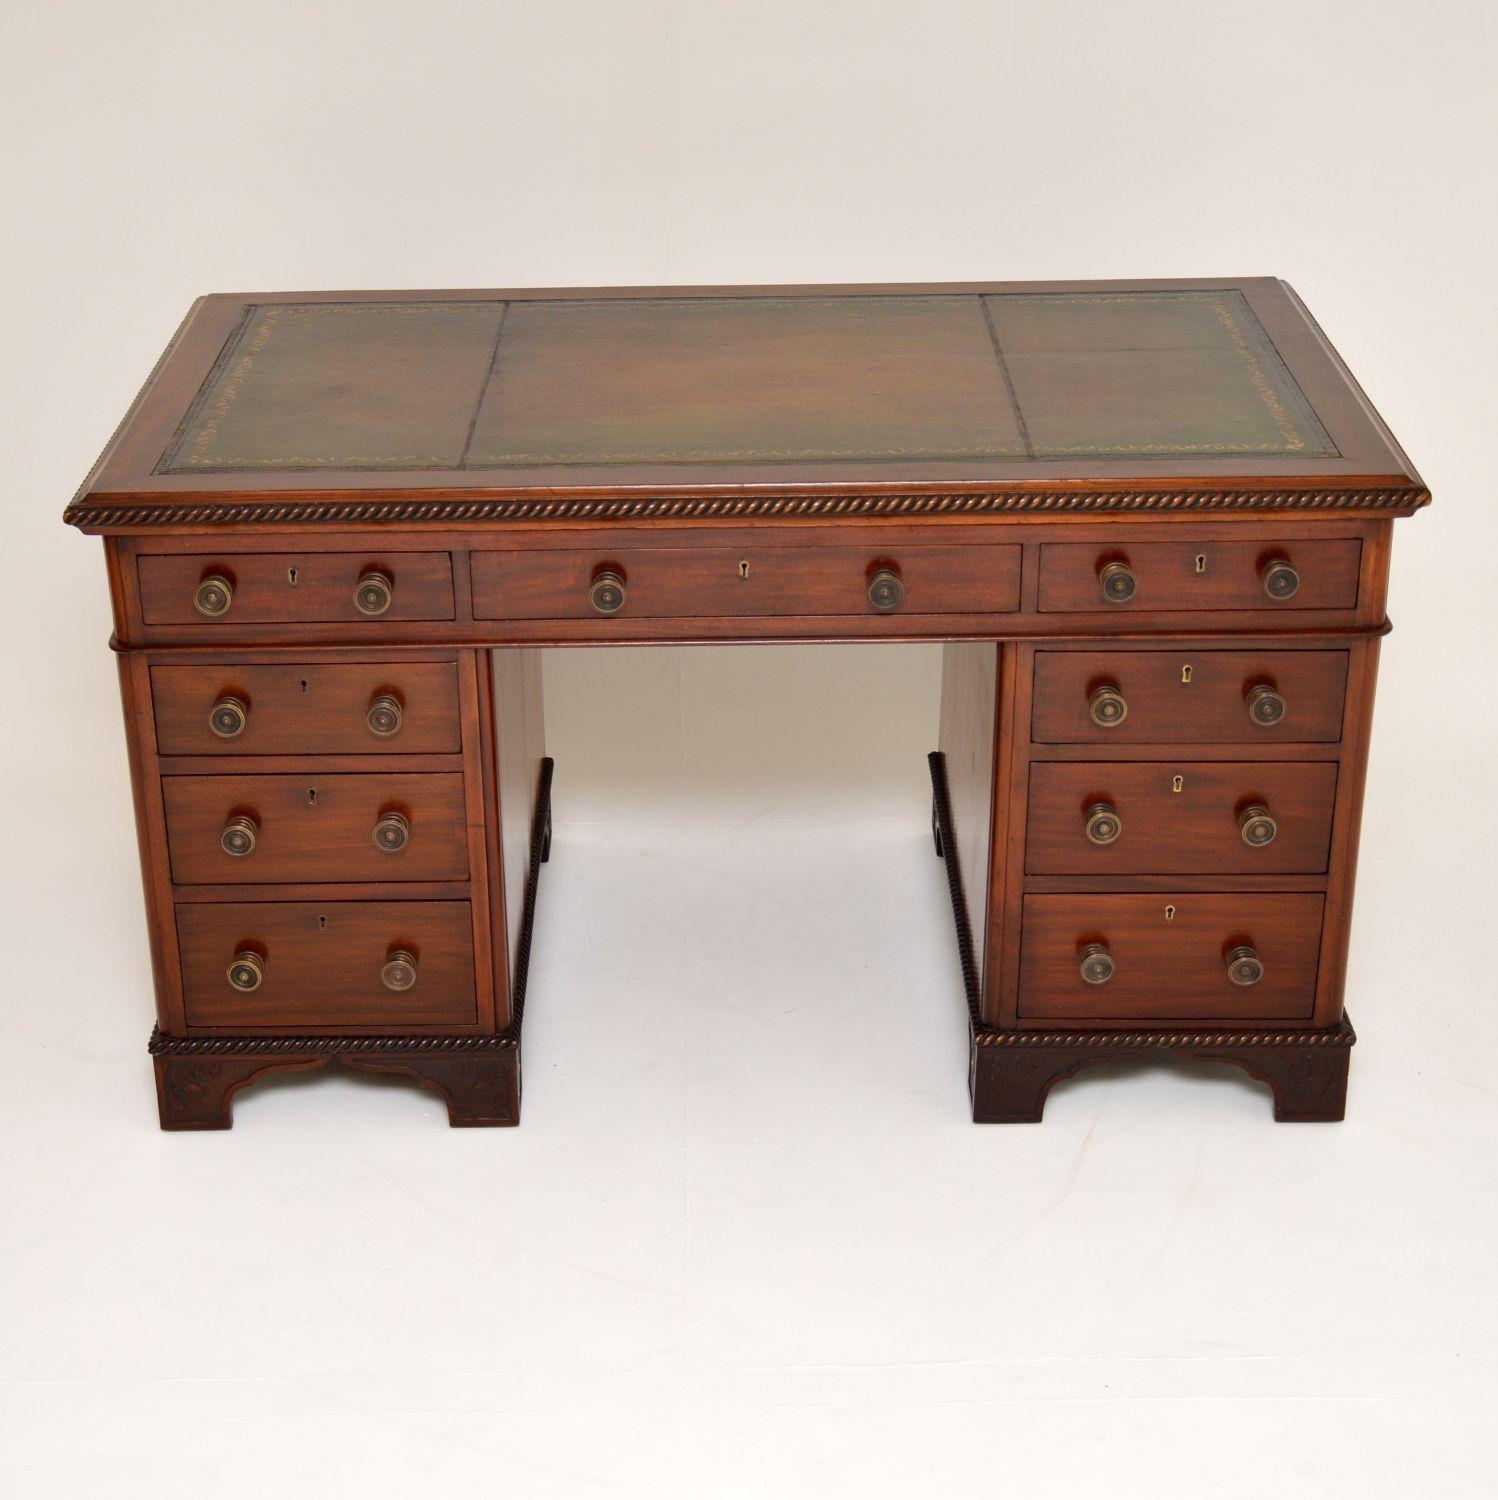 This generously proportioned antique desk with plenty of working space is of extremely high quality & is in very good original condition. It’s solid mahogany, dating roughly to circa 1860s-1980s period & has some fine features. The tooled leather